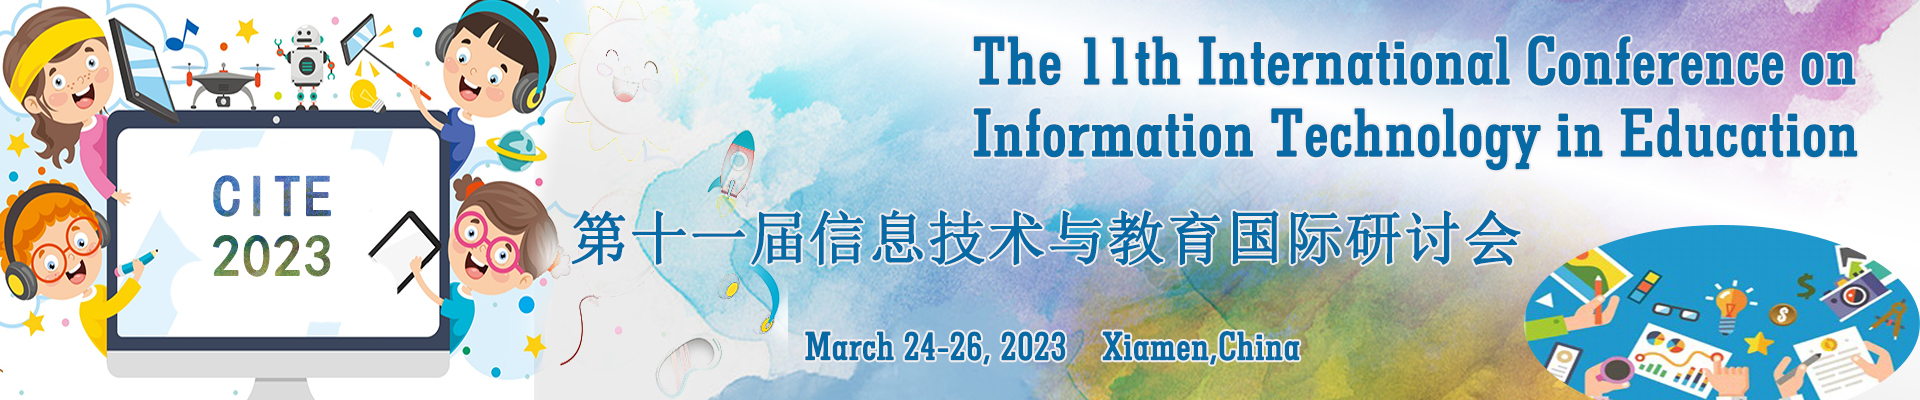 The 11th International Conference on Information Technology in Education (CITE 2023), Xiamen, Fujian, China